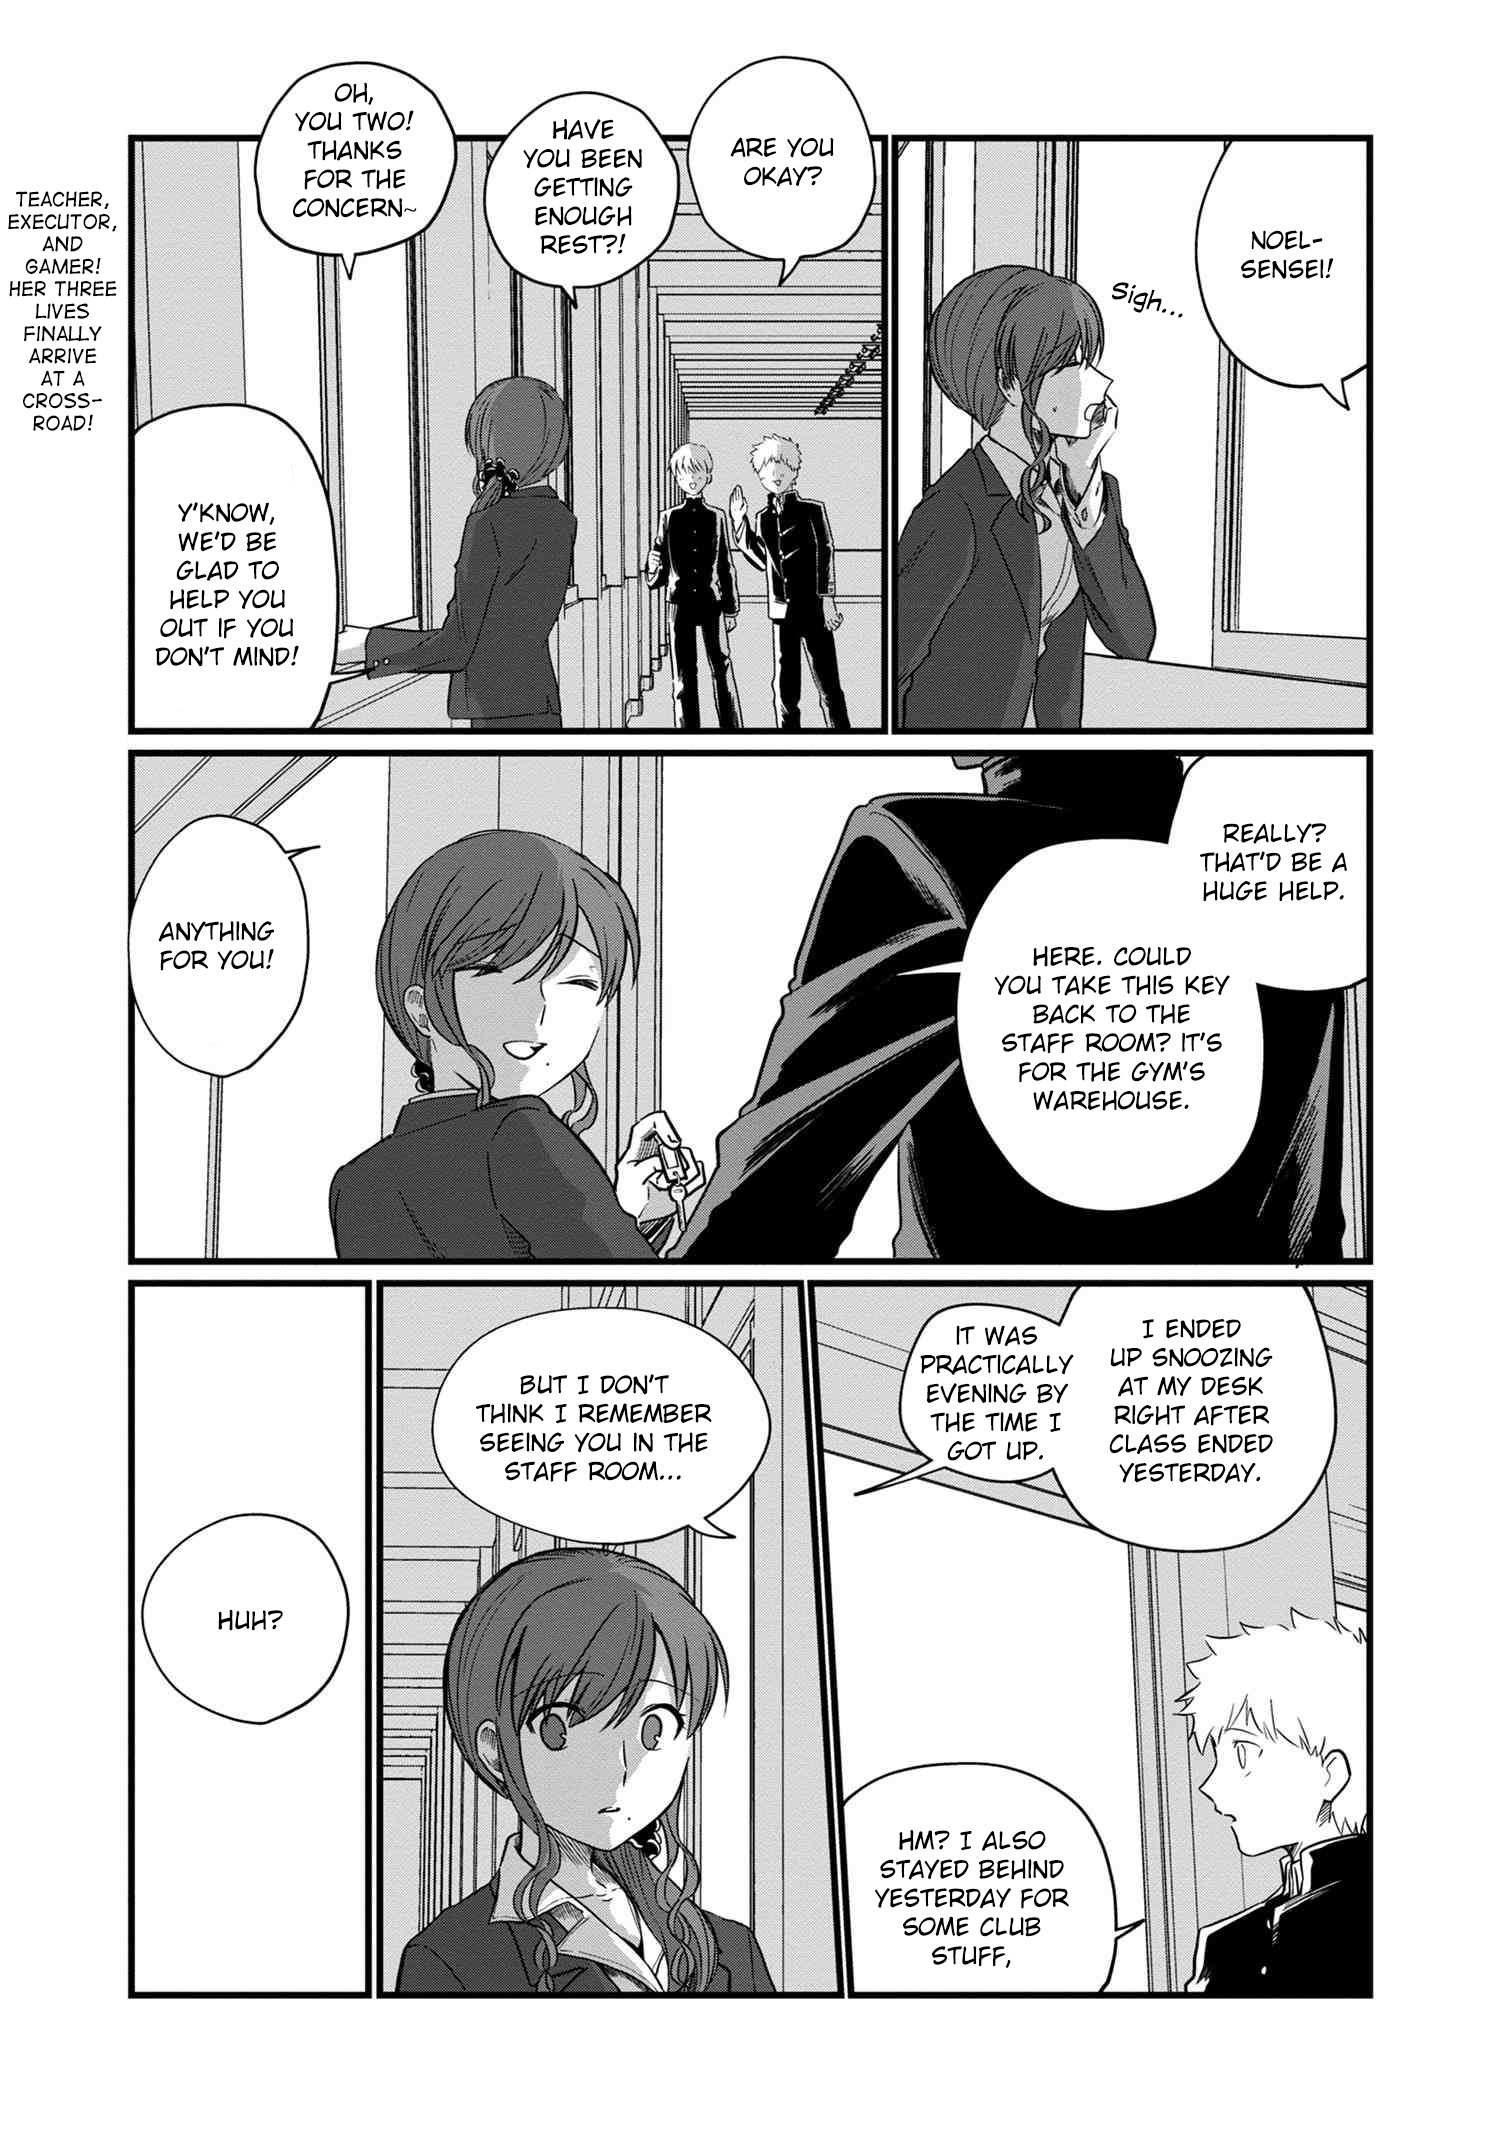 Melty Blood: Type Lumina Piece In Paradise - chapter 10.1 - #1